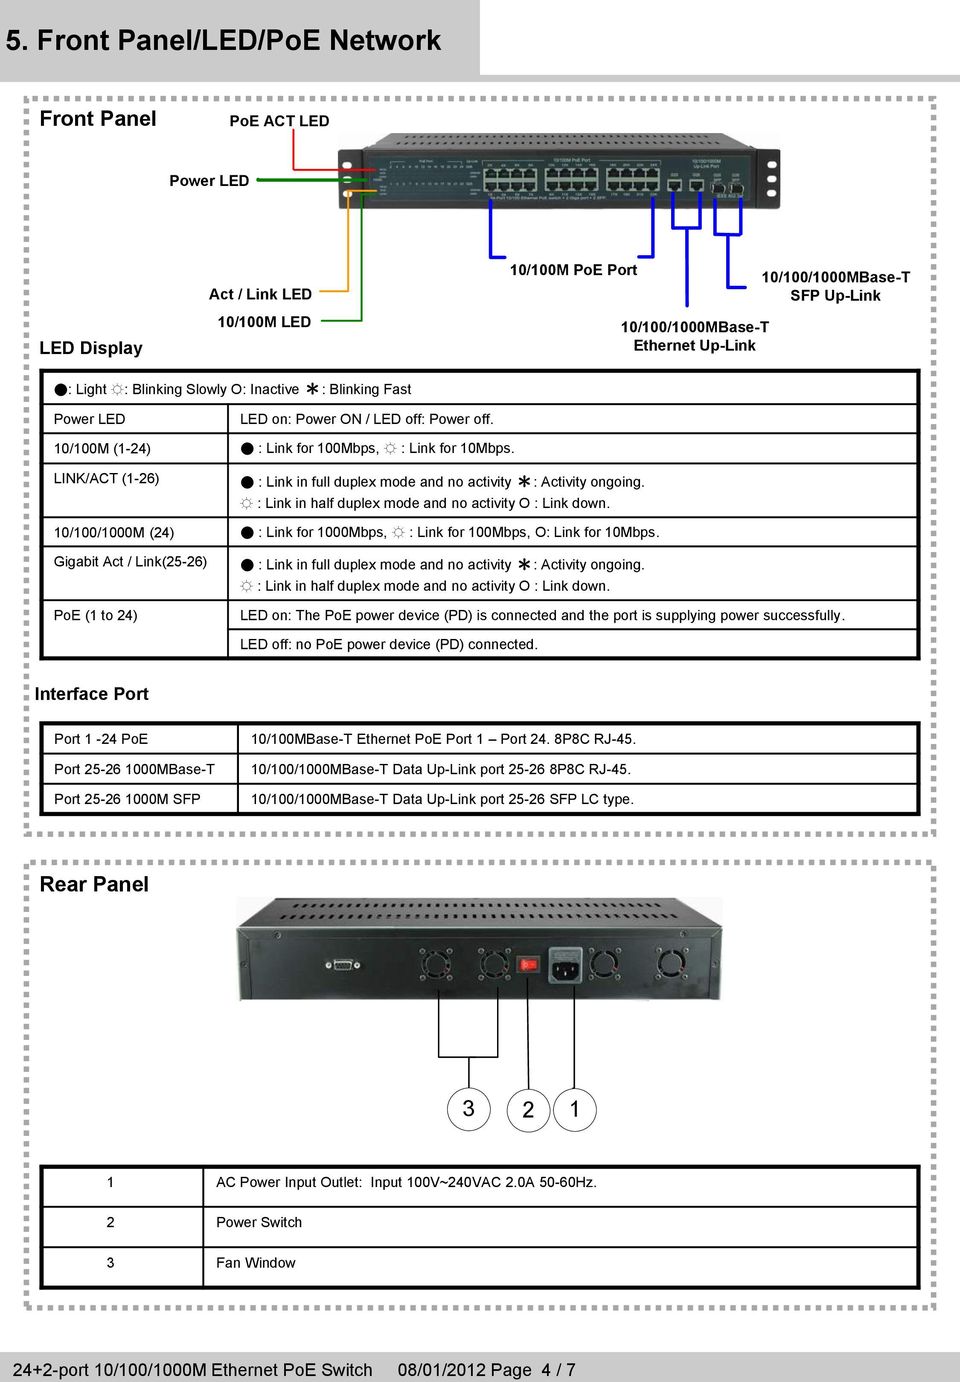 LINK/ACT (1-26) 10/100/1000M (24) Gigabit Act / Link(25-26) PoE (1 to 24) : Link in full duplex mode and no activity *: Activity ongoing. : Link in half duplex mode and no activity O : Link down.